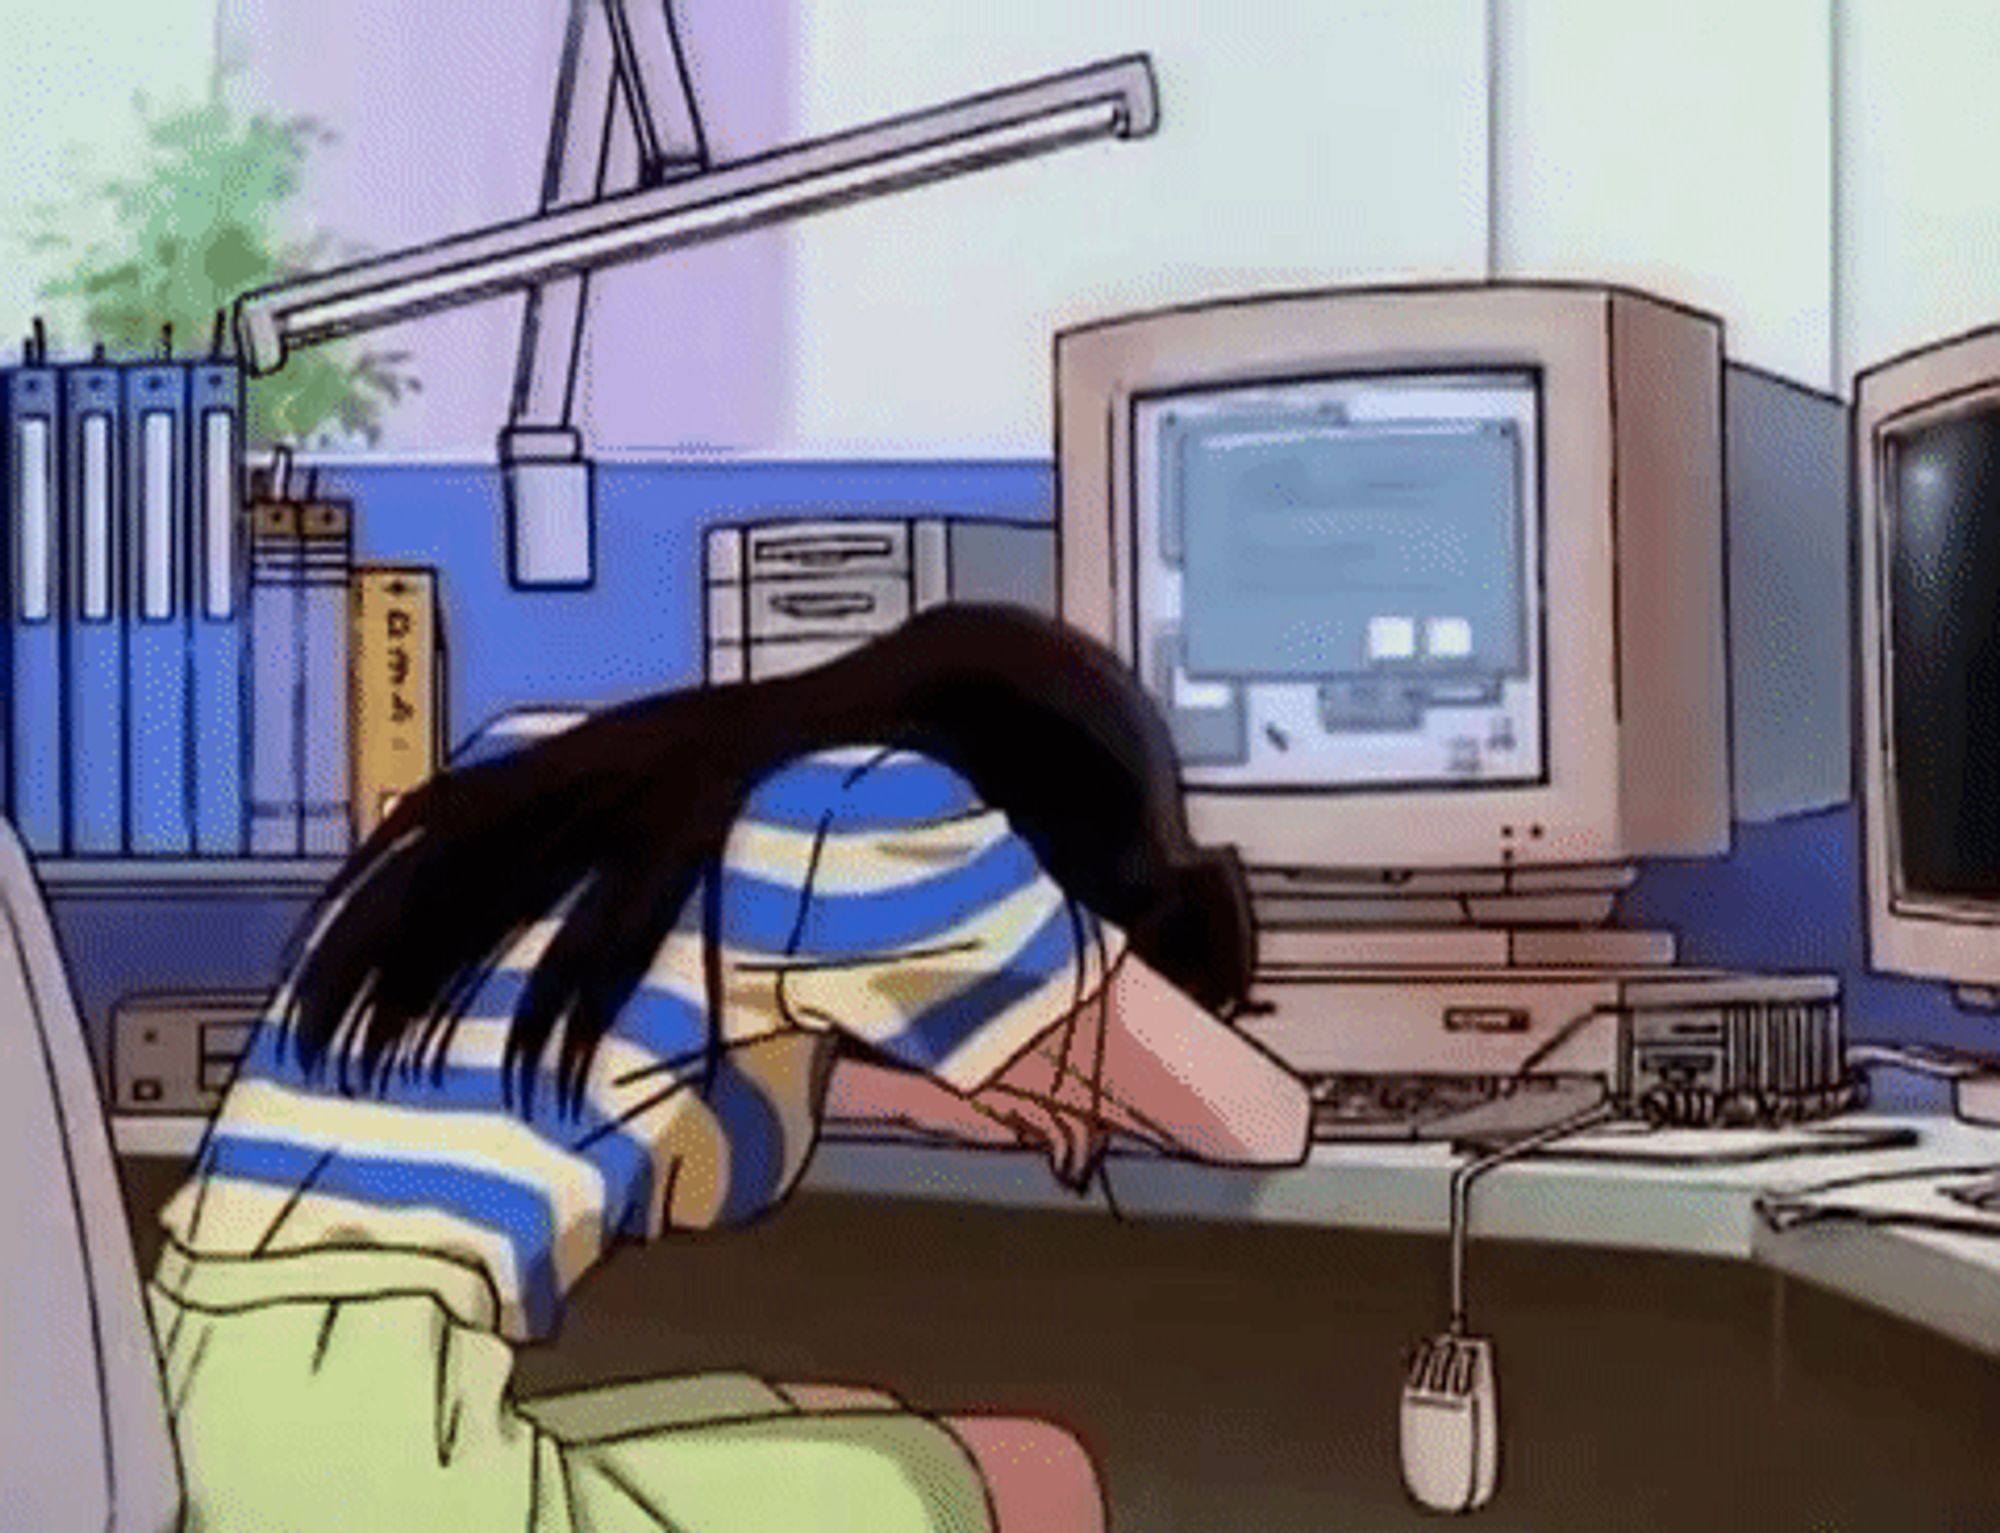 woman with long back hair with her head down against a desk and her arms in front of an old school CRT monitor and a mouse dangling down from the desk